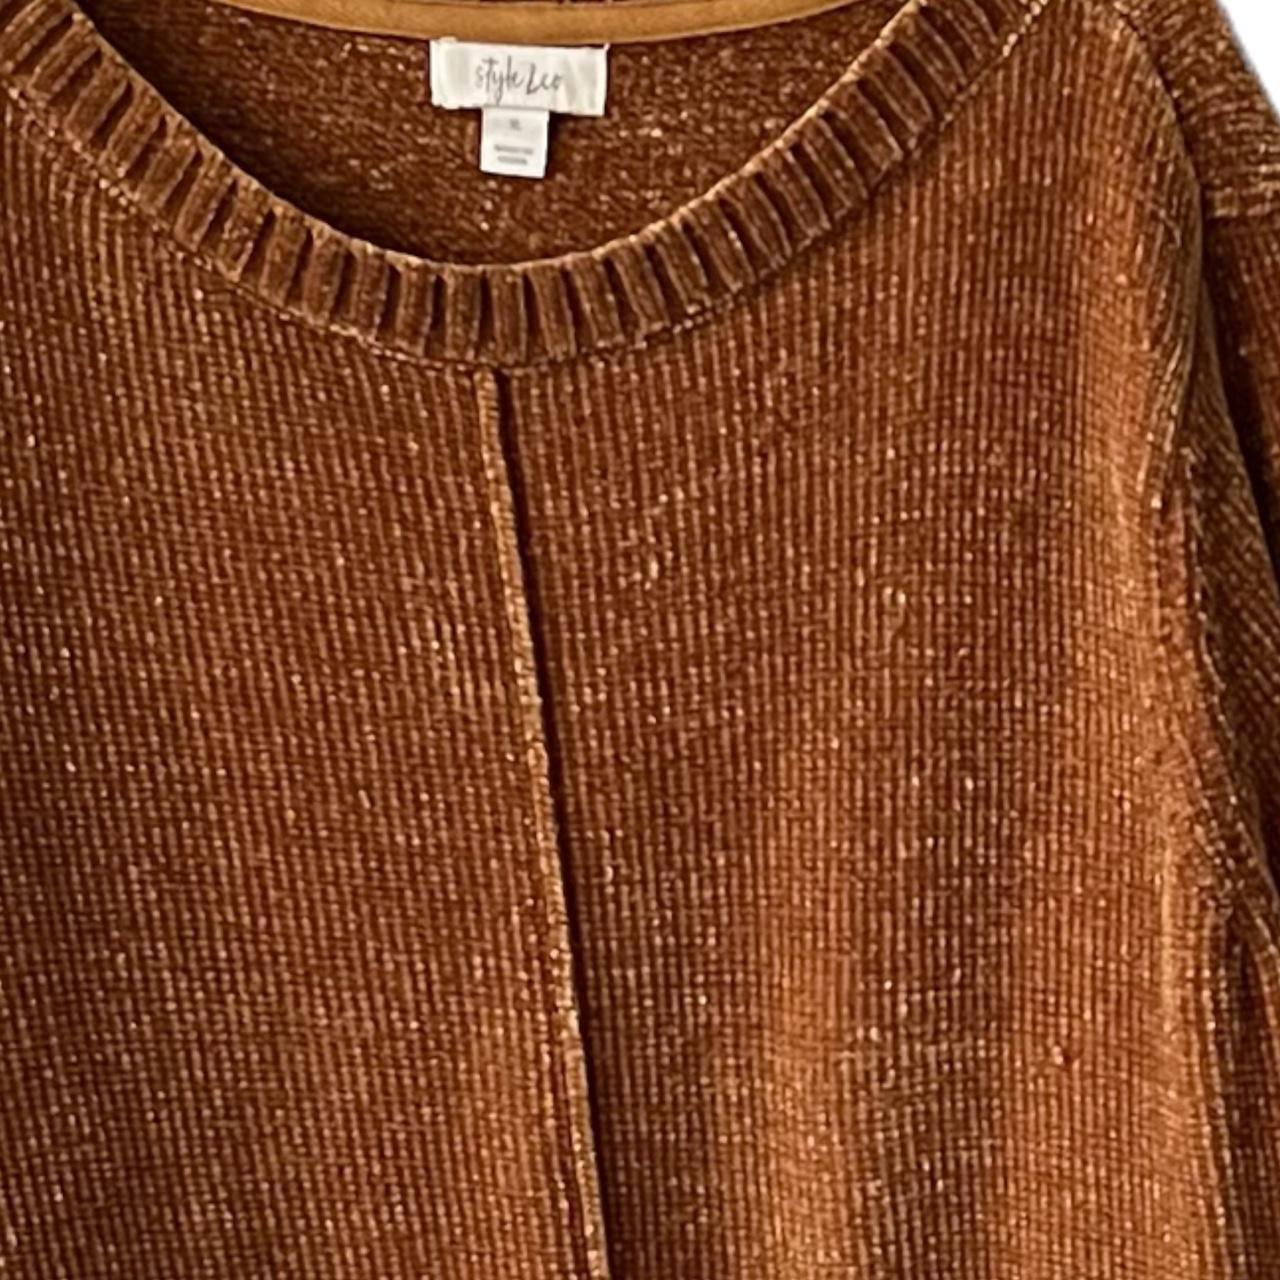 Oversize comfy Fall Carmel pull over sweater. Has... - Depop